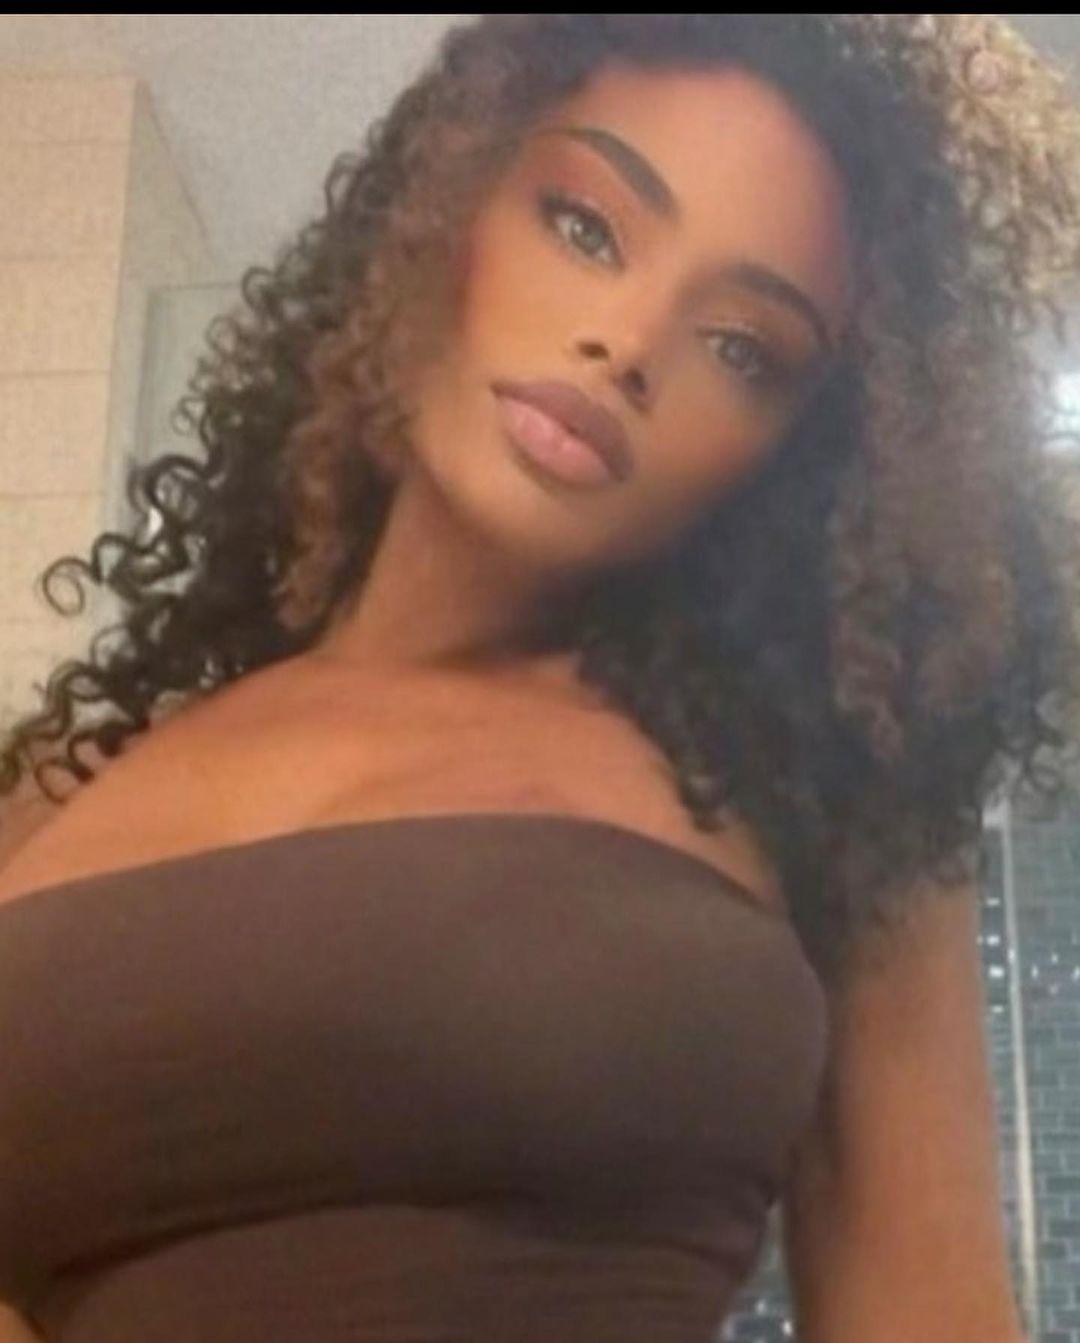 L.A. Model Maleesa Mooney Found Dead In Refrigerator, 'Likely Involved In A Violent Physical Altercation'